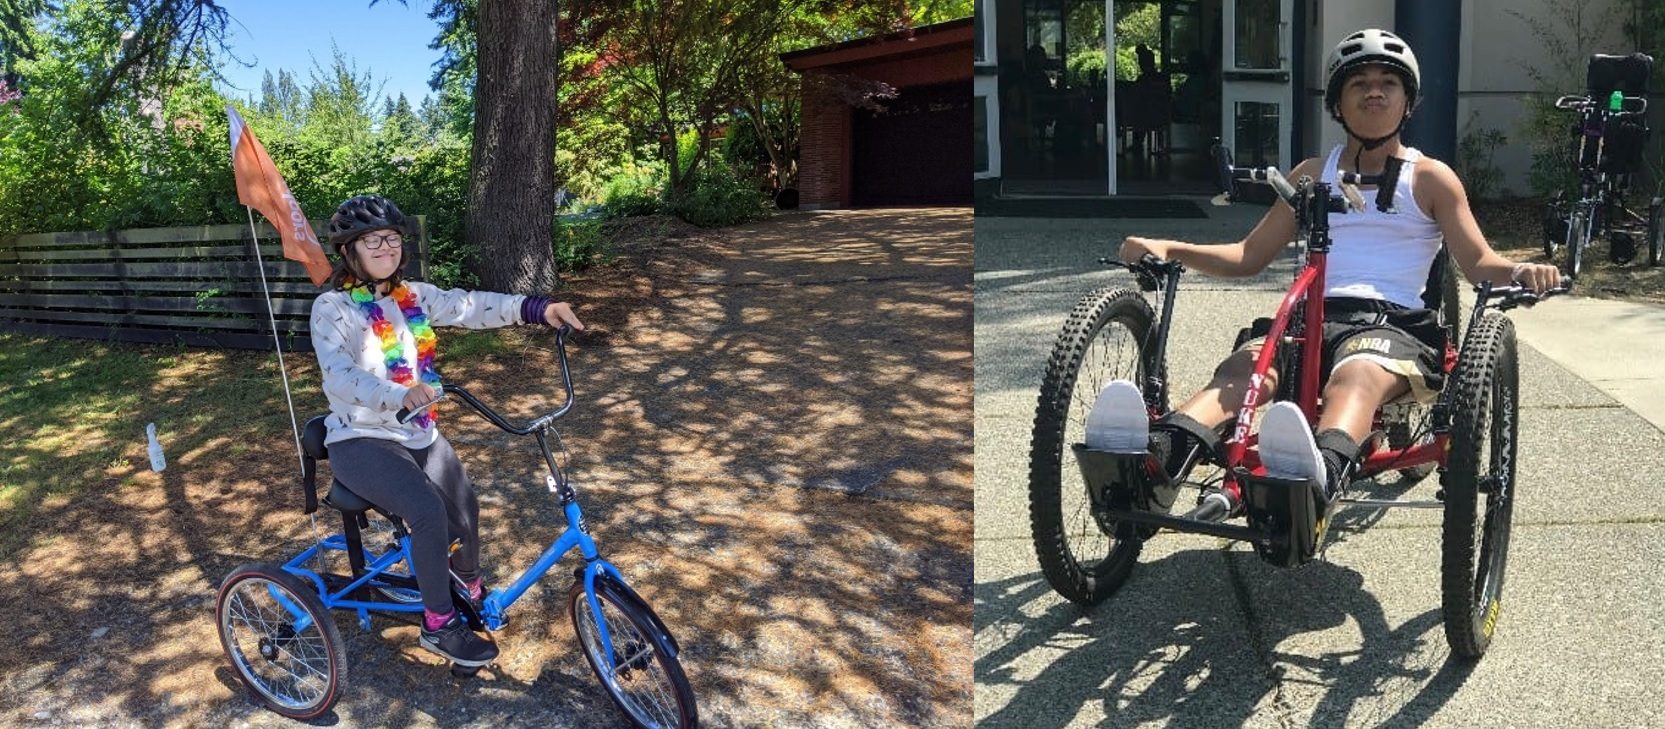 Left: A cyclist enjoys a ride on one of Outdoors for All’s trikes. Right: A cyclist uses a handcycle from Outdoors for All.